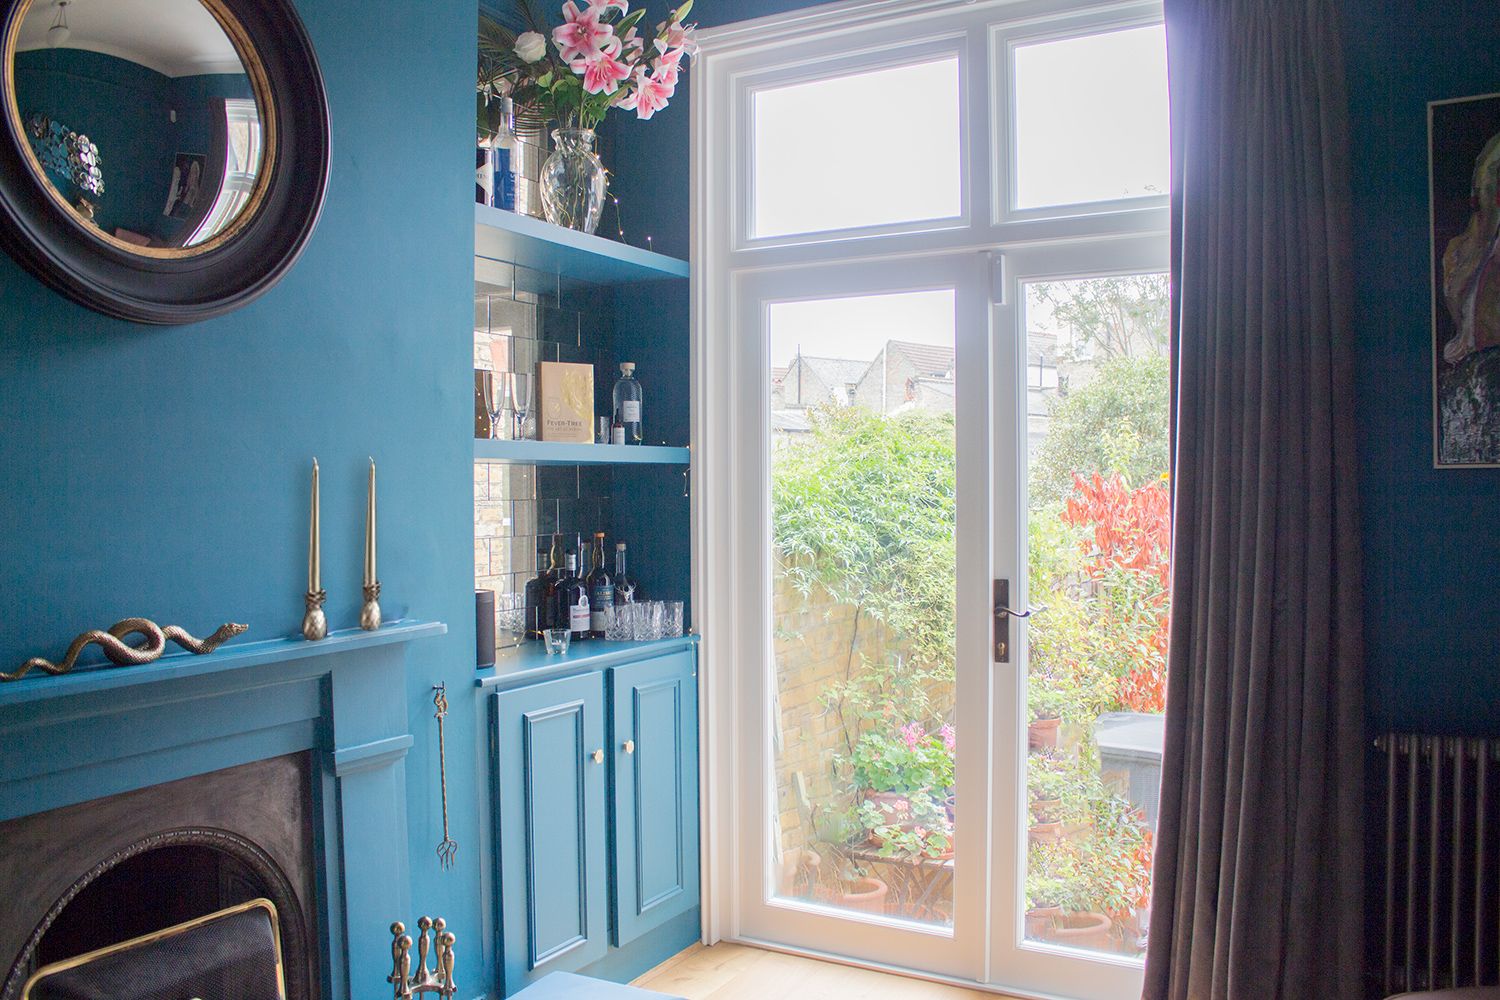 A photo of the back of the reception rooms which is painted in a rich teal, with alcove shelving built in.